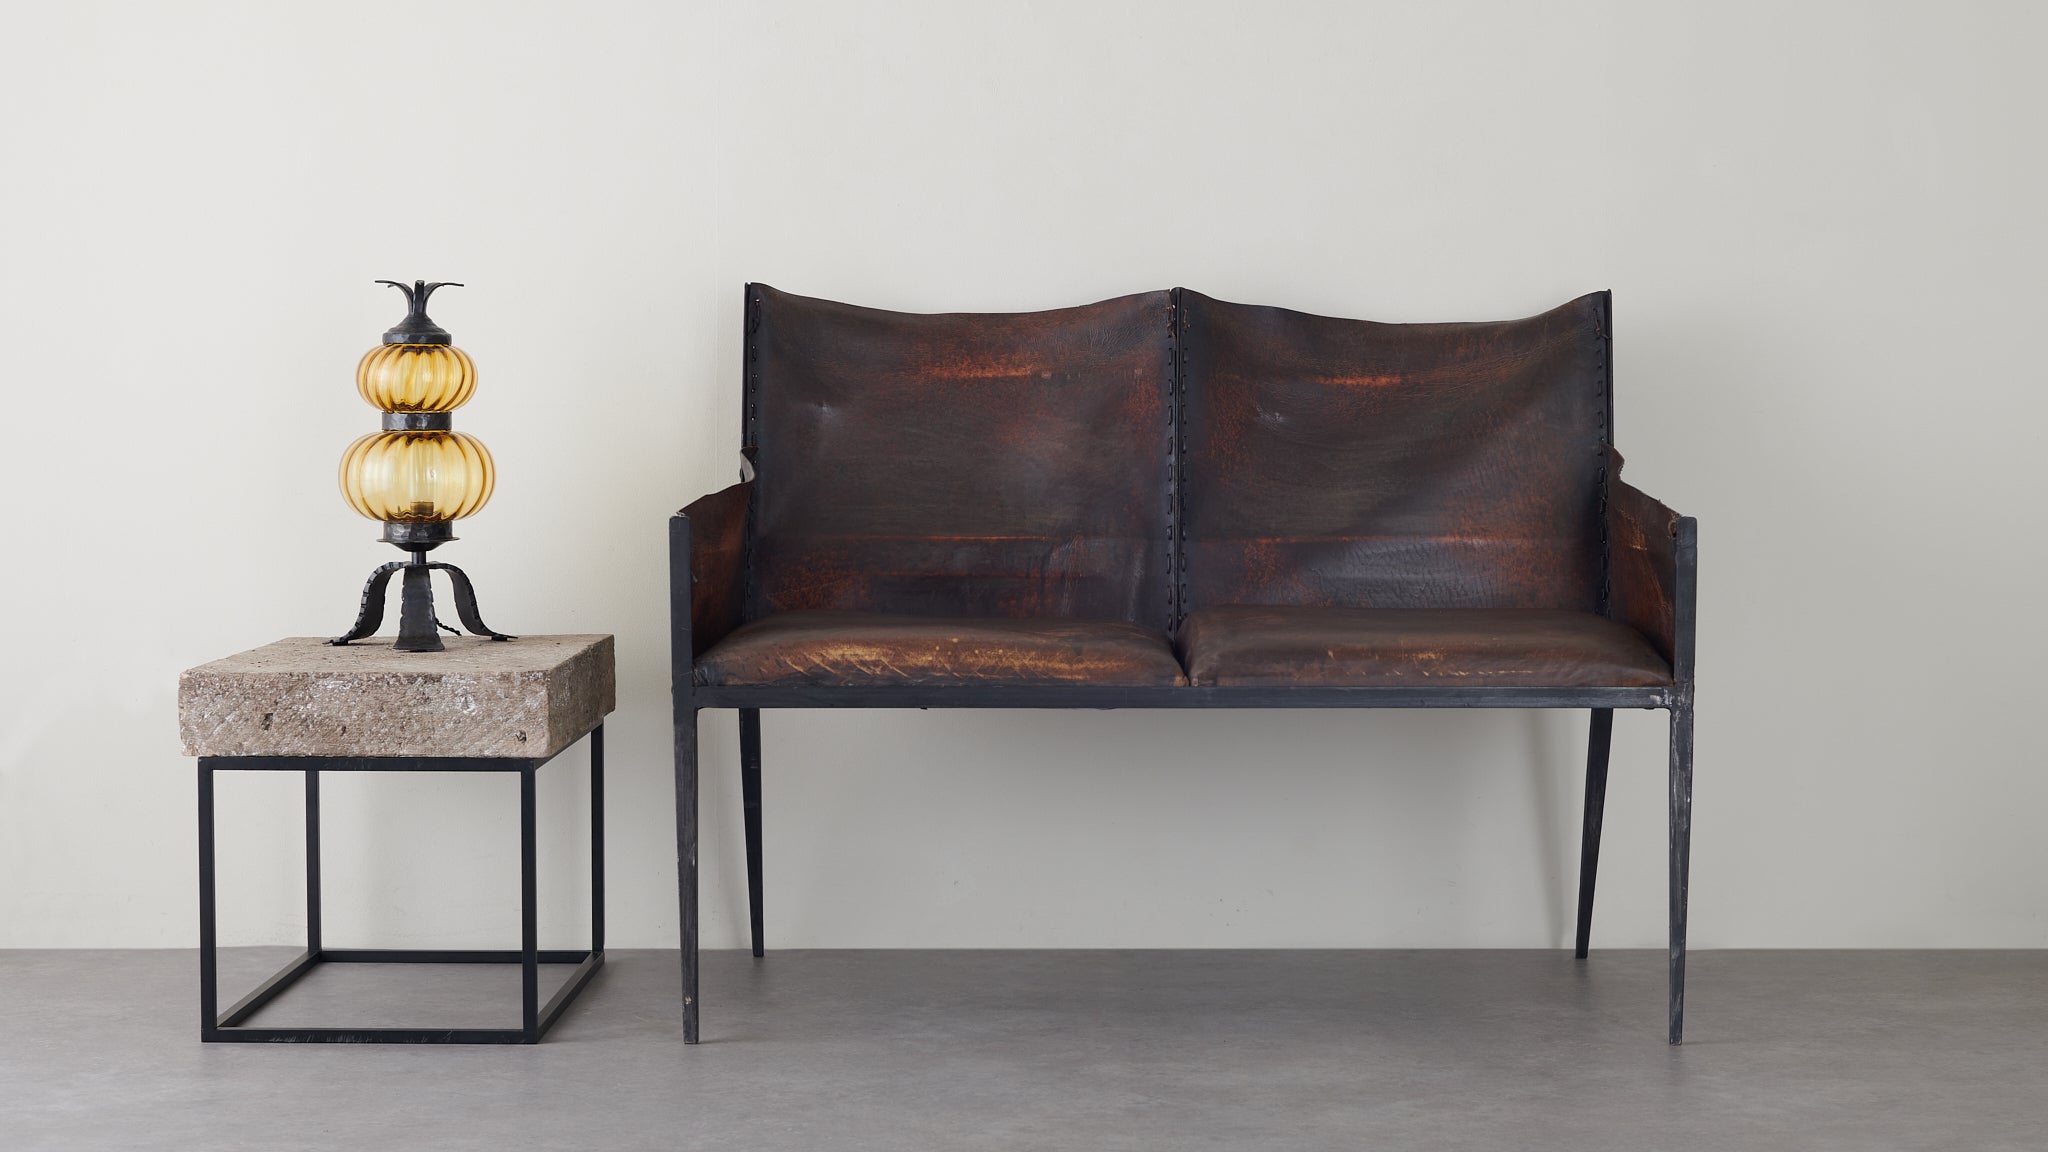 IRON AND LEATHER TWO SEAT SETTEE IN THE MANNER OF JEAN-MICHEL FRANK